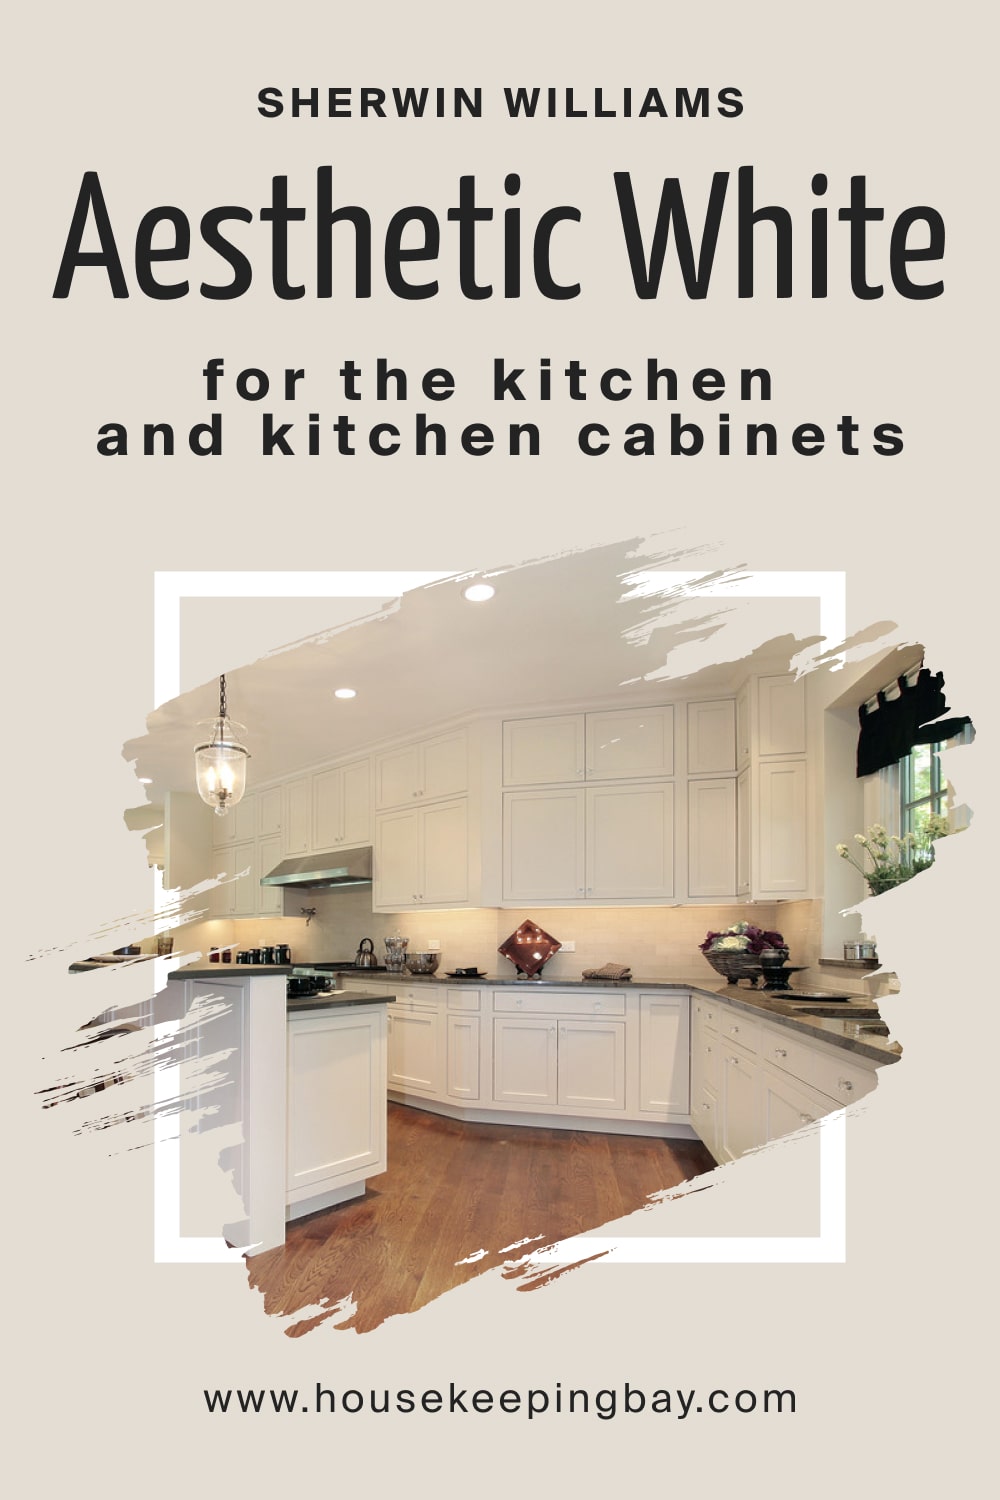 Sherwin Williams. Aesthetic White SW 7035 For the Kitchen and Kitchen Cabinets